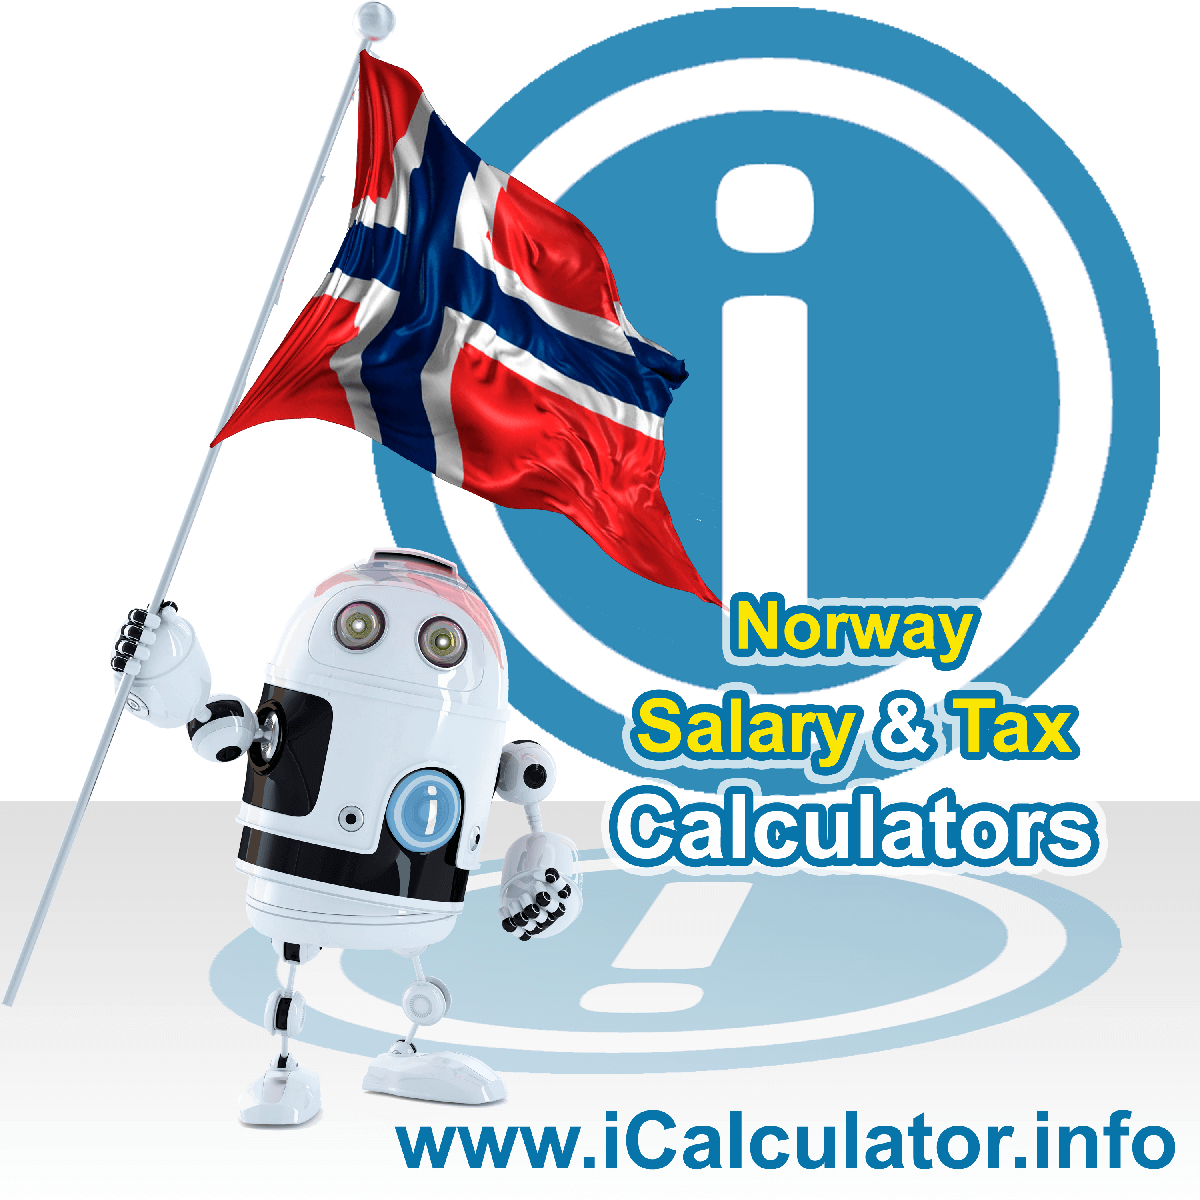 Norway Tax Calculator. This image shows the Norway flag and information relating to the tax formula for the Norway Salary Calculator